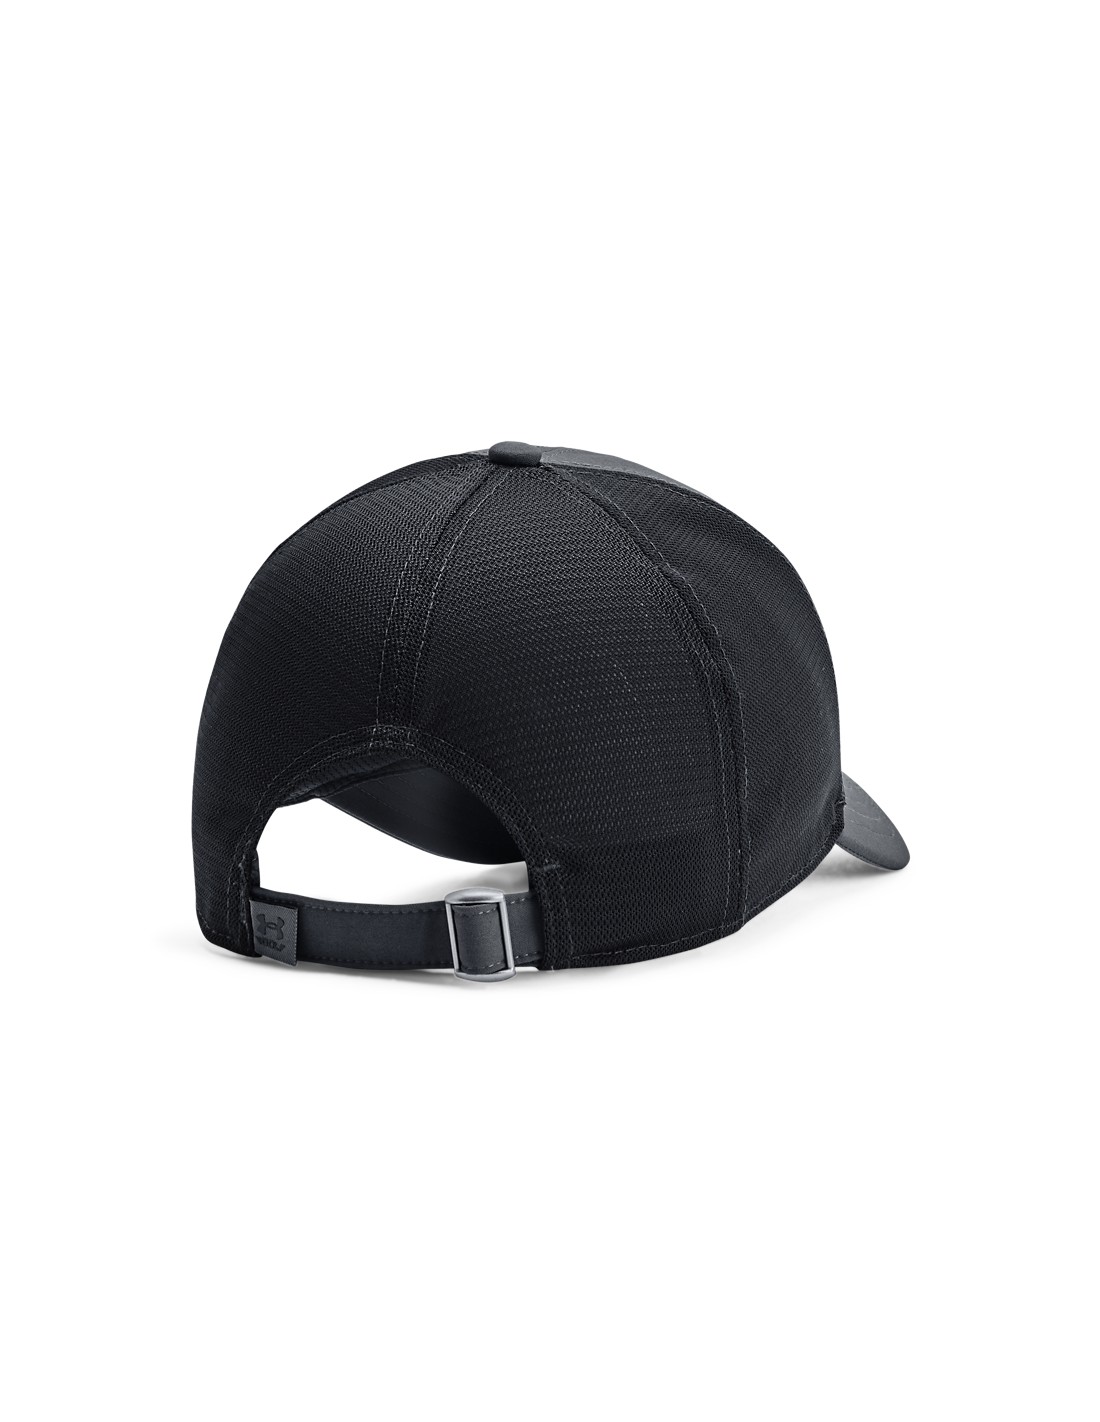 Under Armour - Iso-Chill Driver Mesh Adj Cap